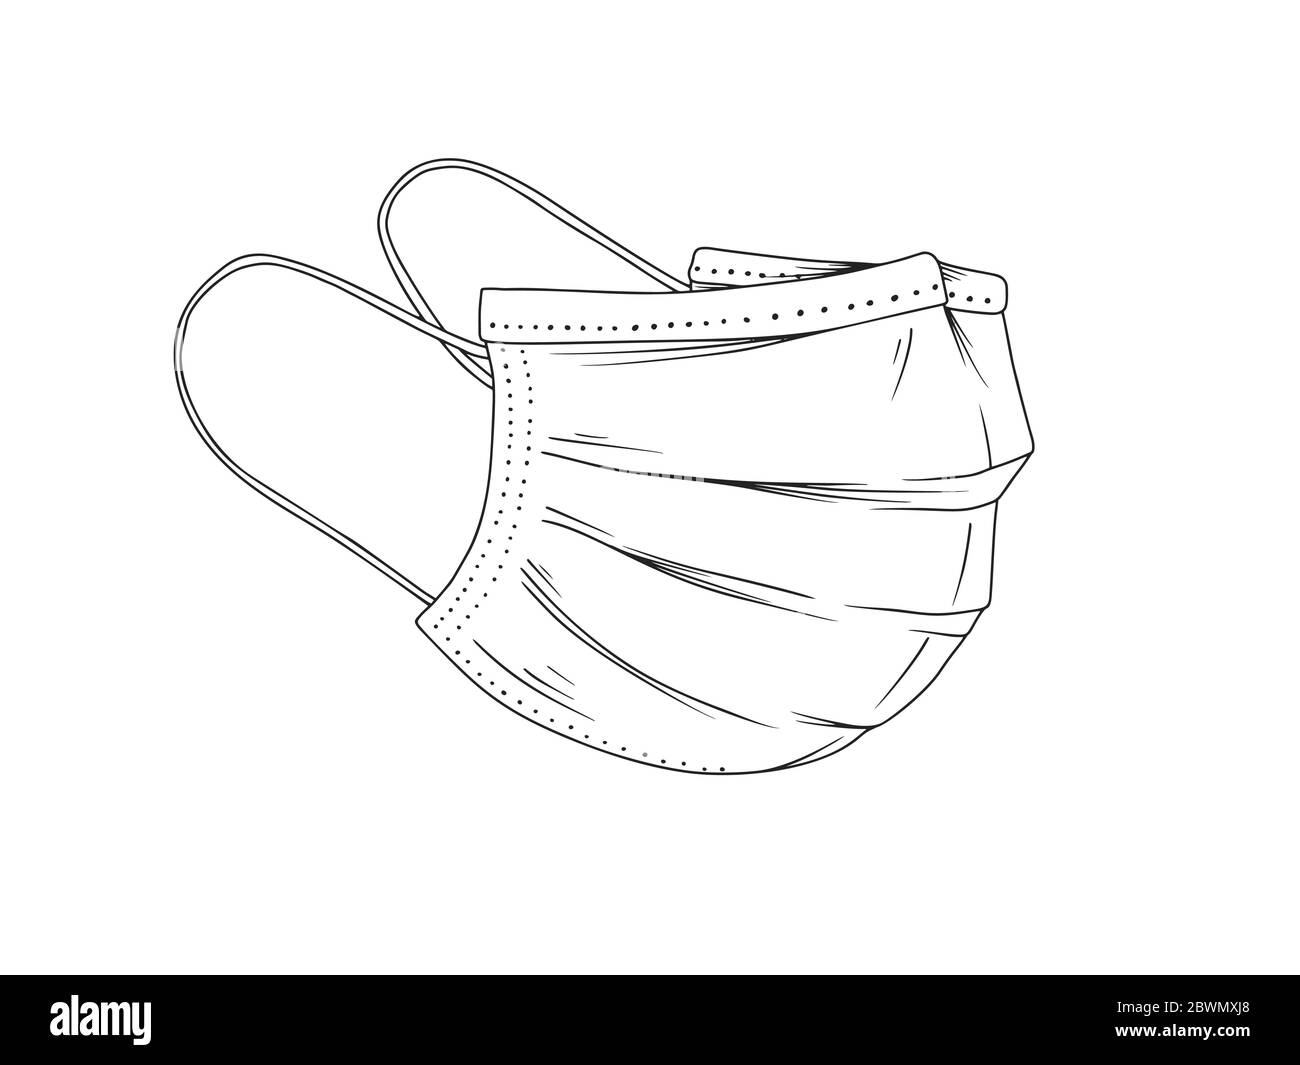 Surgical, Medical Face Mask that protects airborne diseases, viruses. Coronavirus. Defence from air pollution. Vector illustration in sketch style. Stock Vector